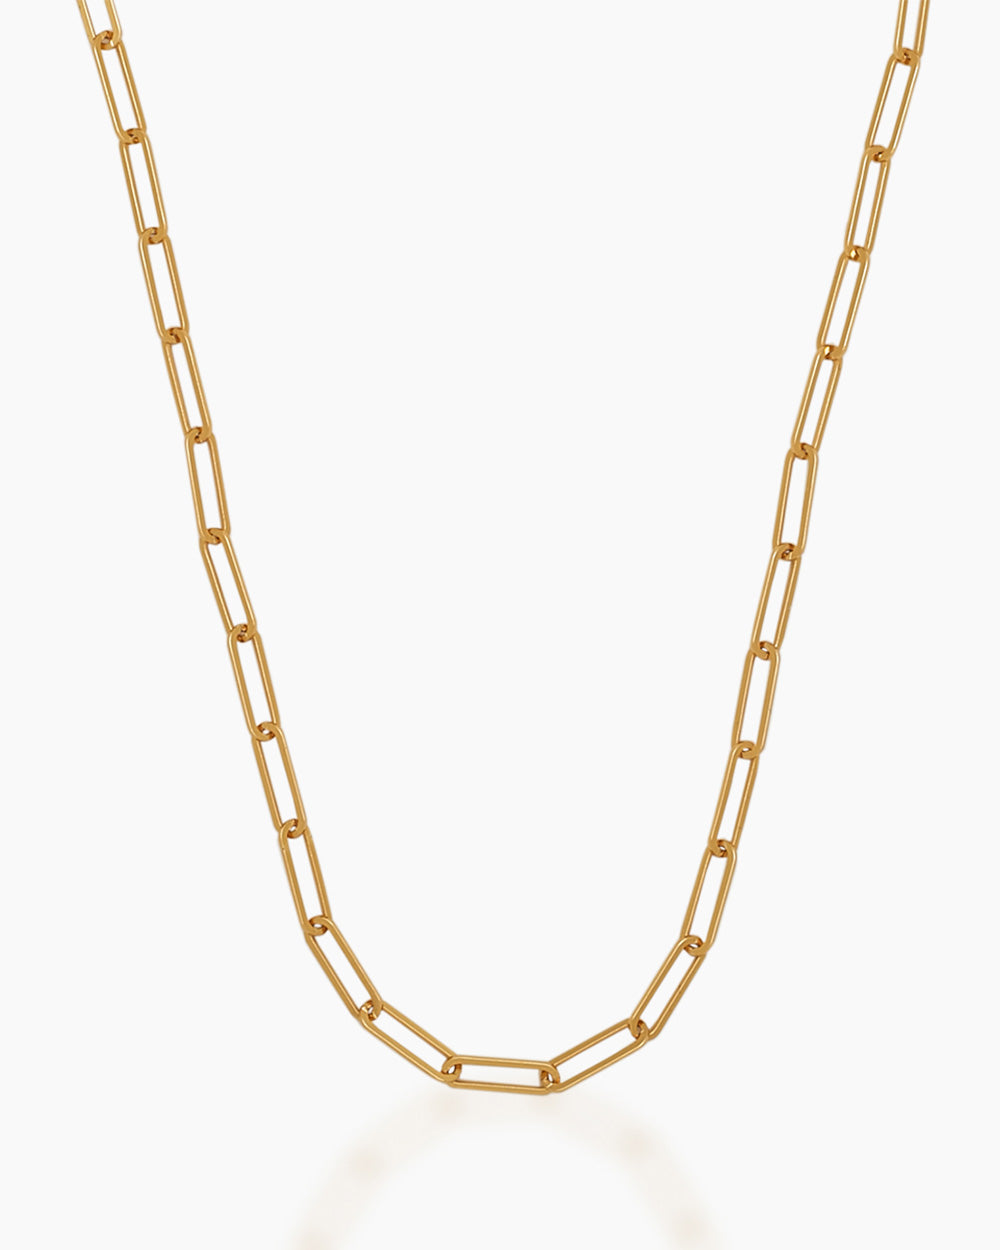 Paper Clip Chains 101 - Our Favorite Gold Chain | J. Landa Jewelry Blog